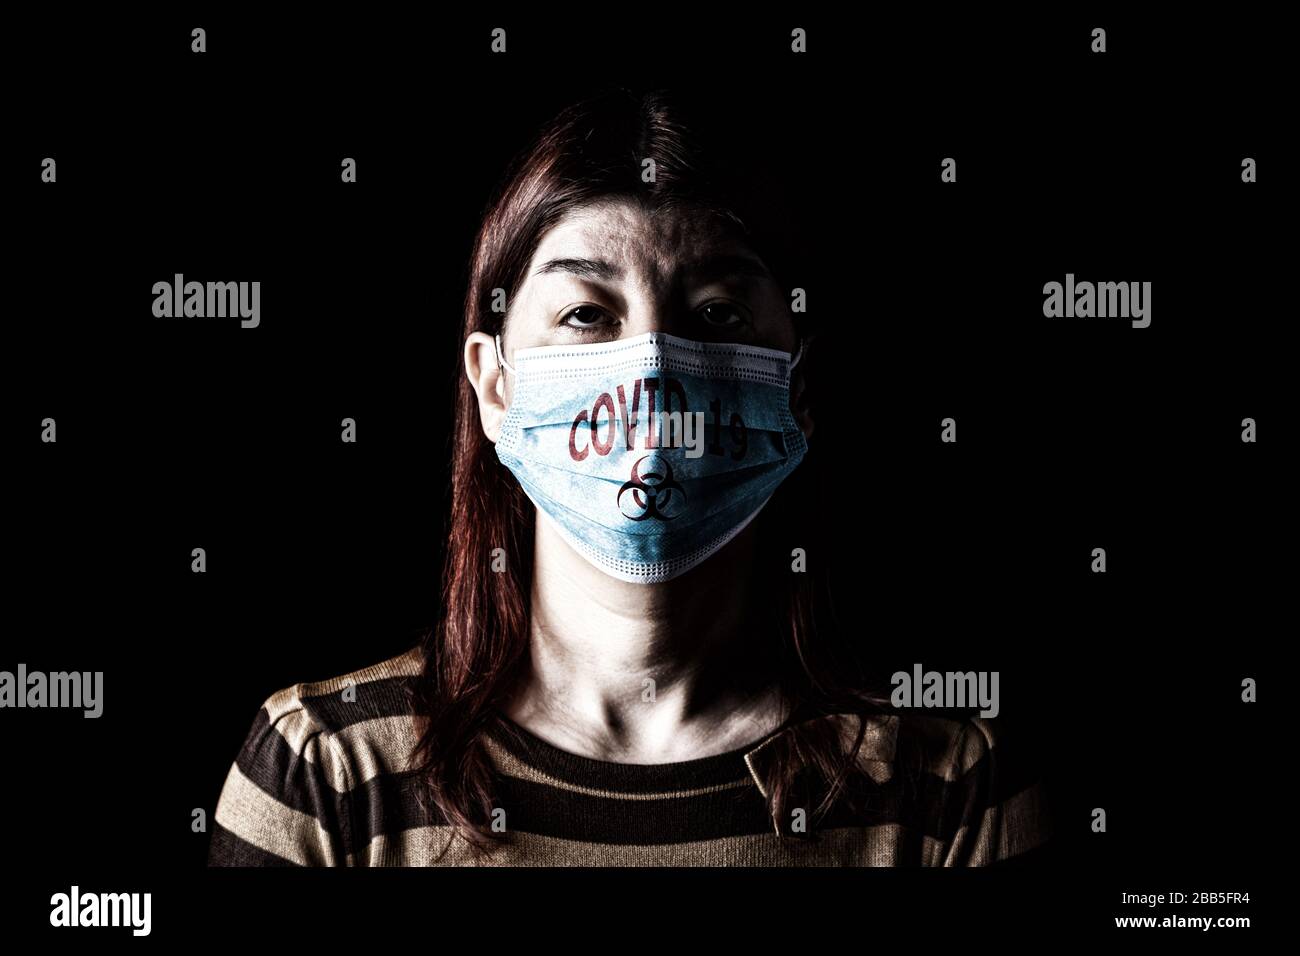 Woman with surgical mask. Biohazard and COVID-19, aka Coronavirus symbol. Pandemic or epidemic and scary, fear or danger concept. Black Background Stock Photo